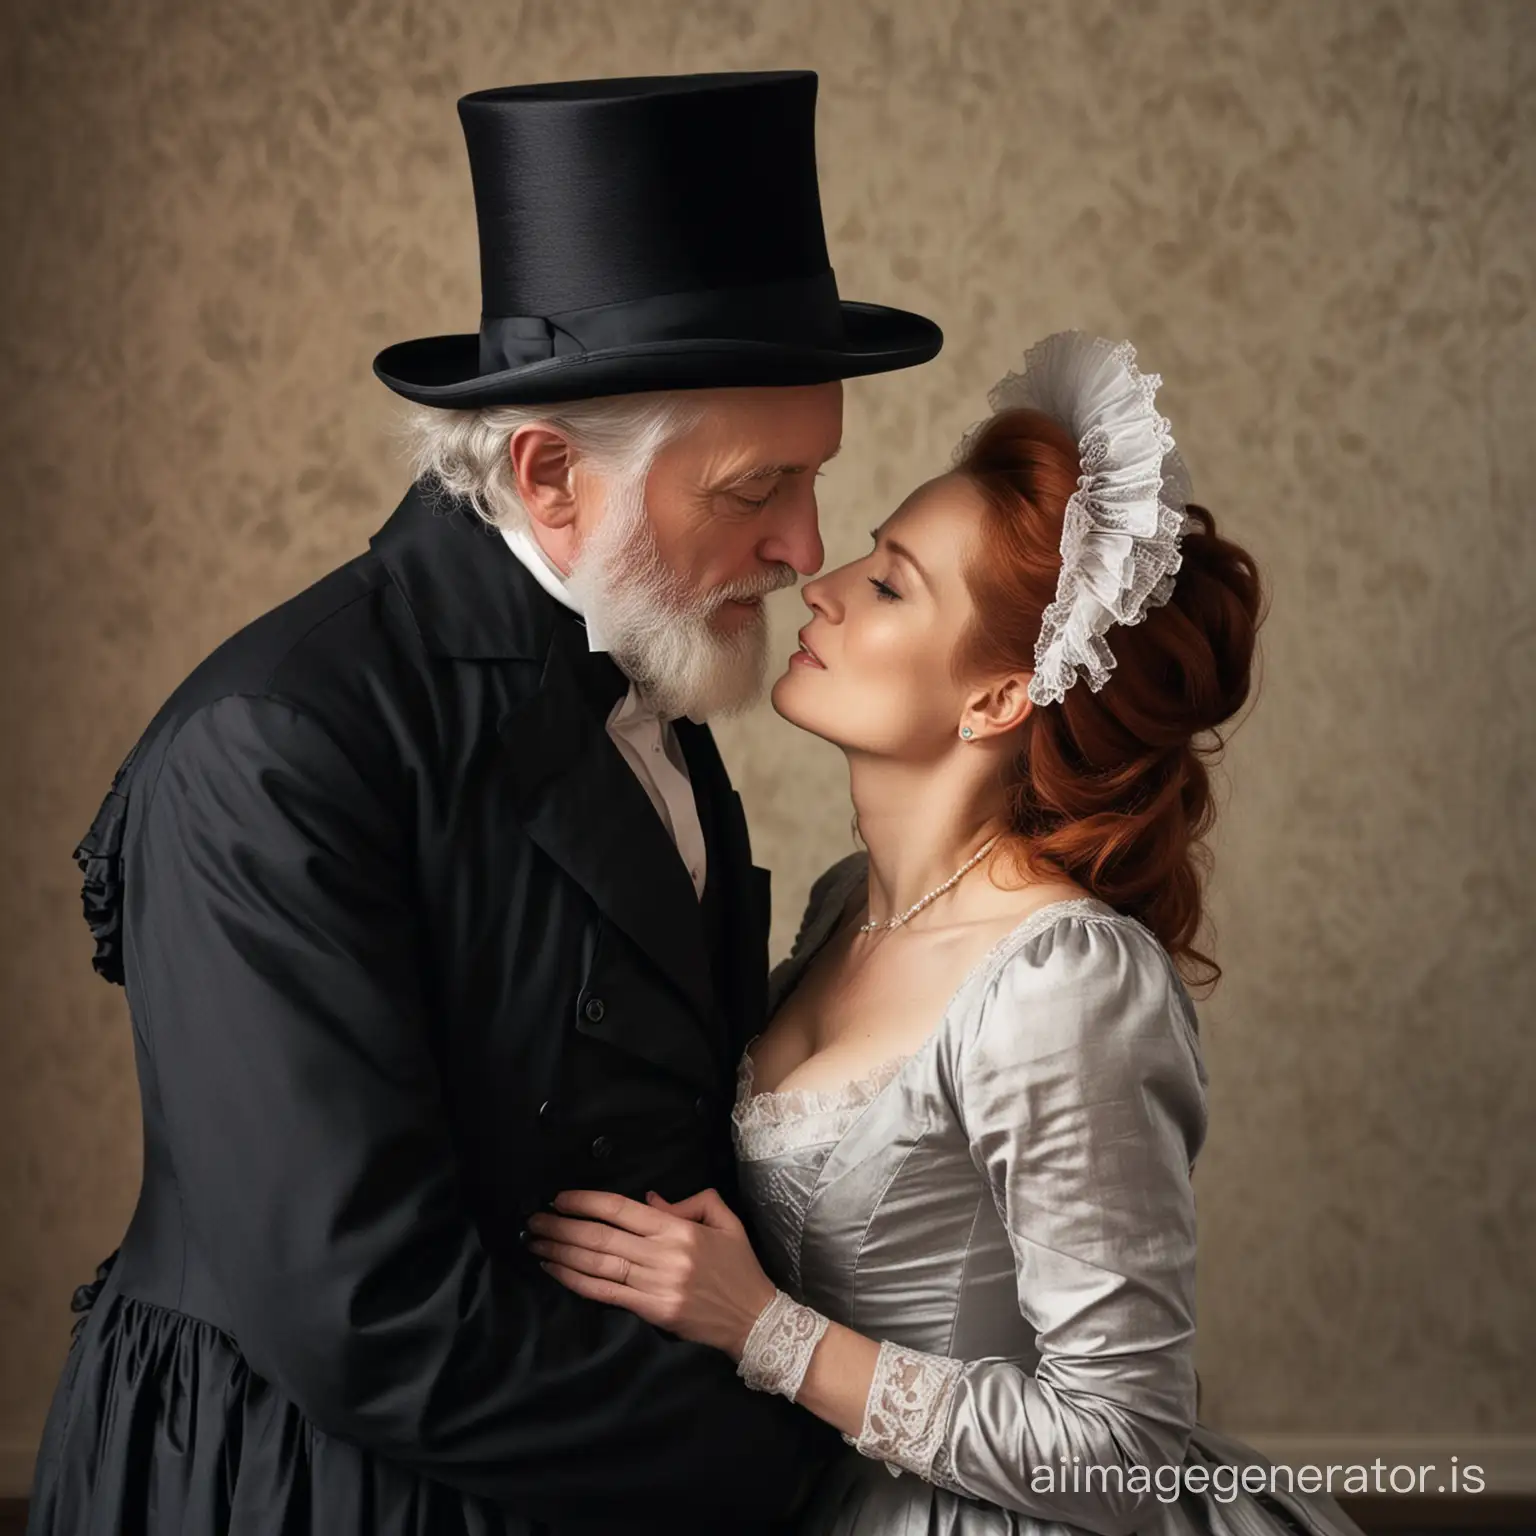 red hair Gillian Anderson wearing a poofy black floor-length loose billowing 1860 Victorian crinoline dress with a frilly bonnet kissing an old man who seems to be her newlywed husband